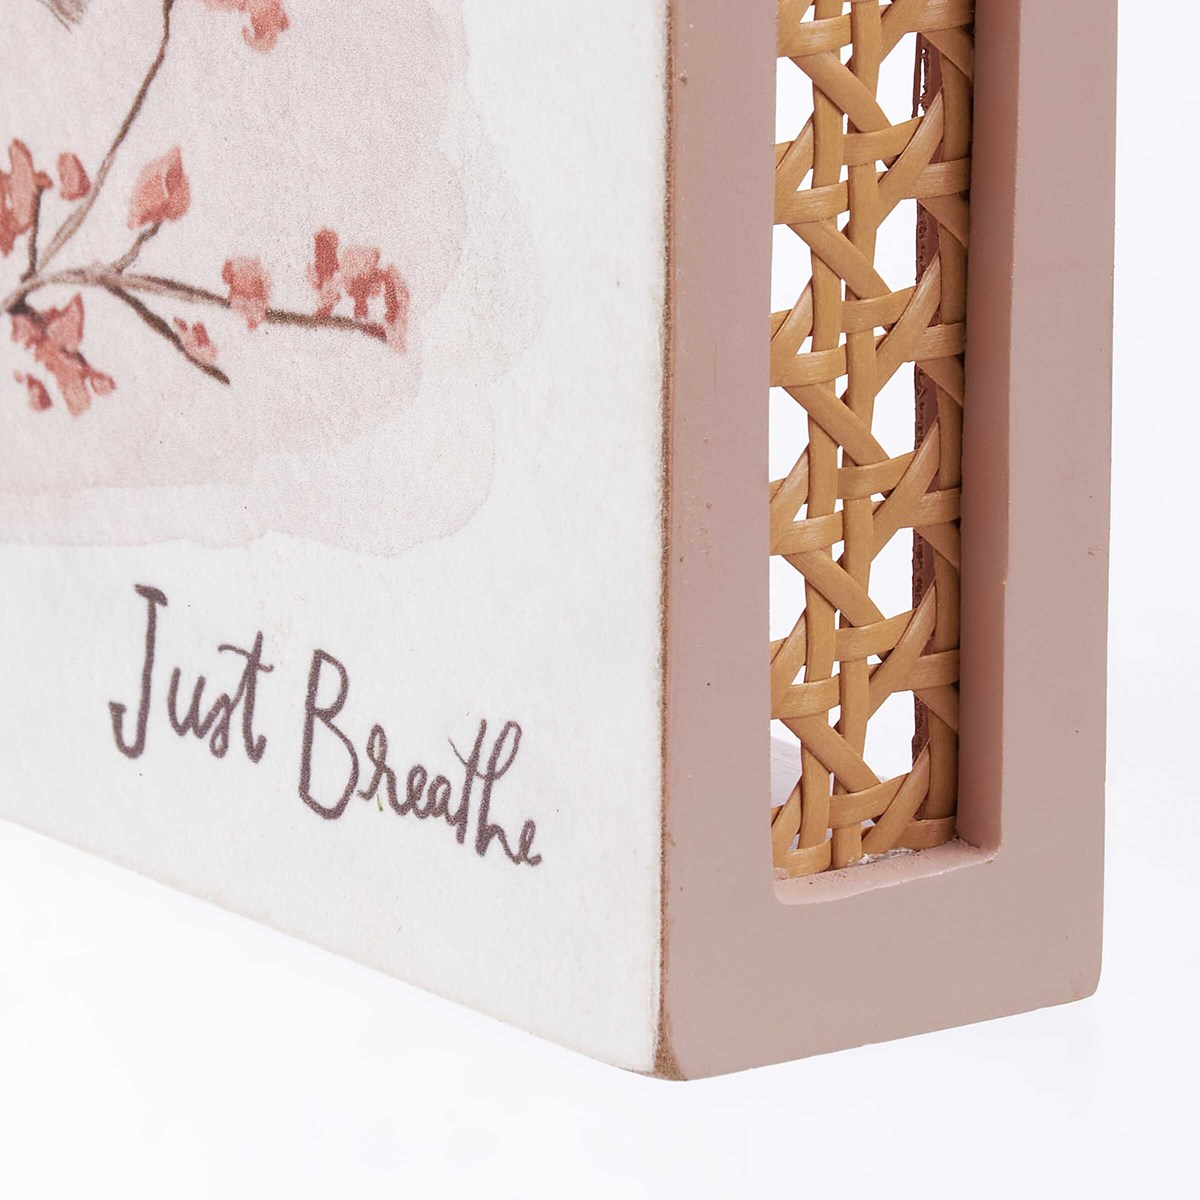 Just Breathe Box Sign - Wood, Paper, Faux Rattan